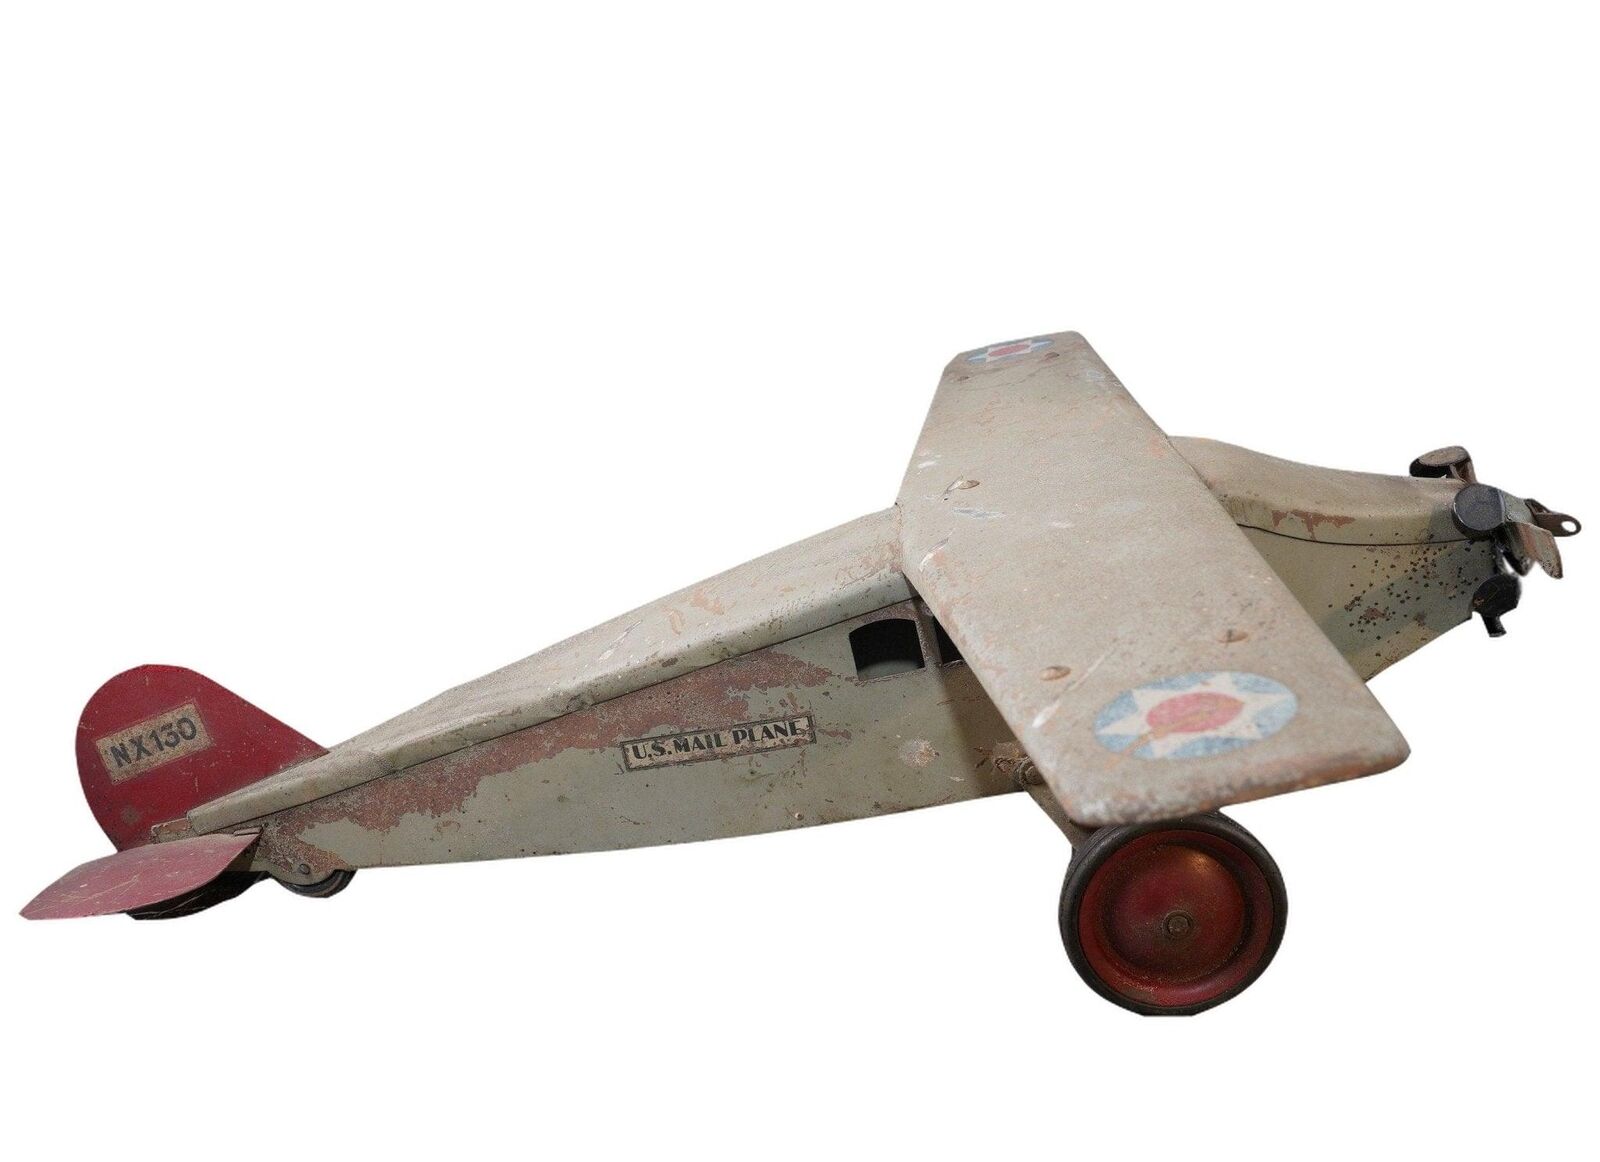 1920's Huge Antique Steel Airplane Toy US Mail Plane